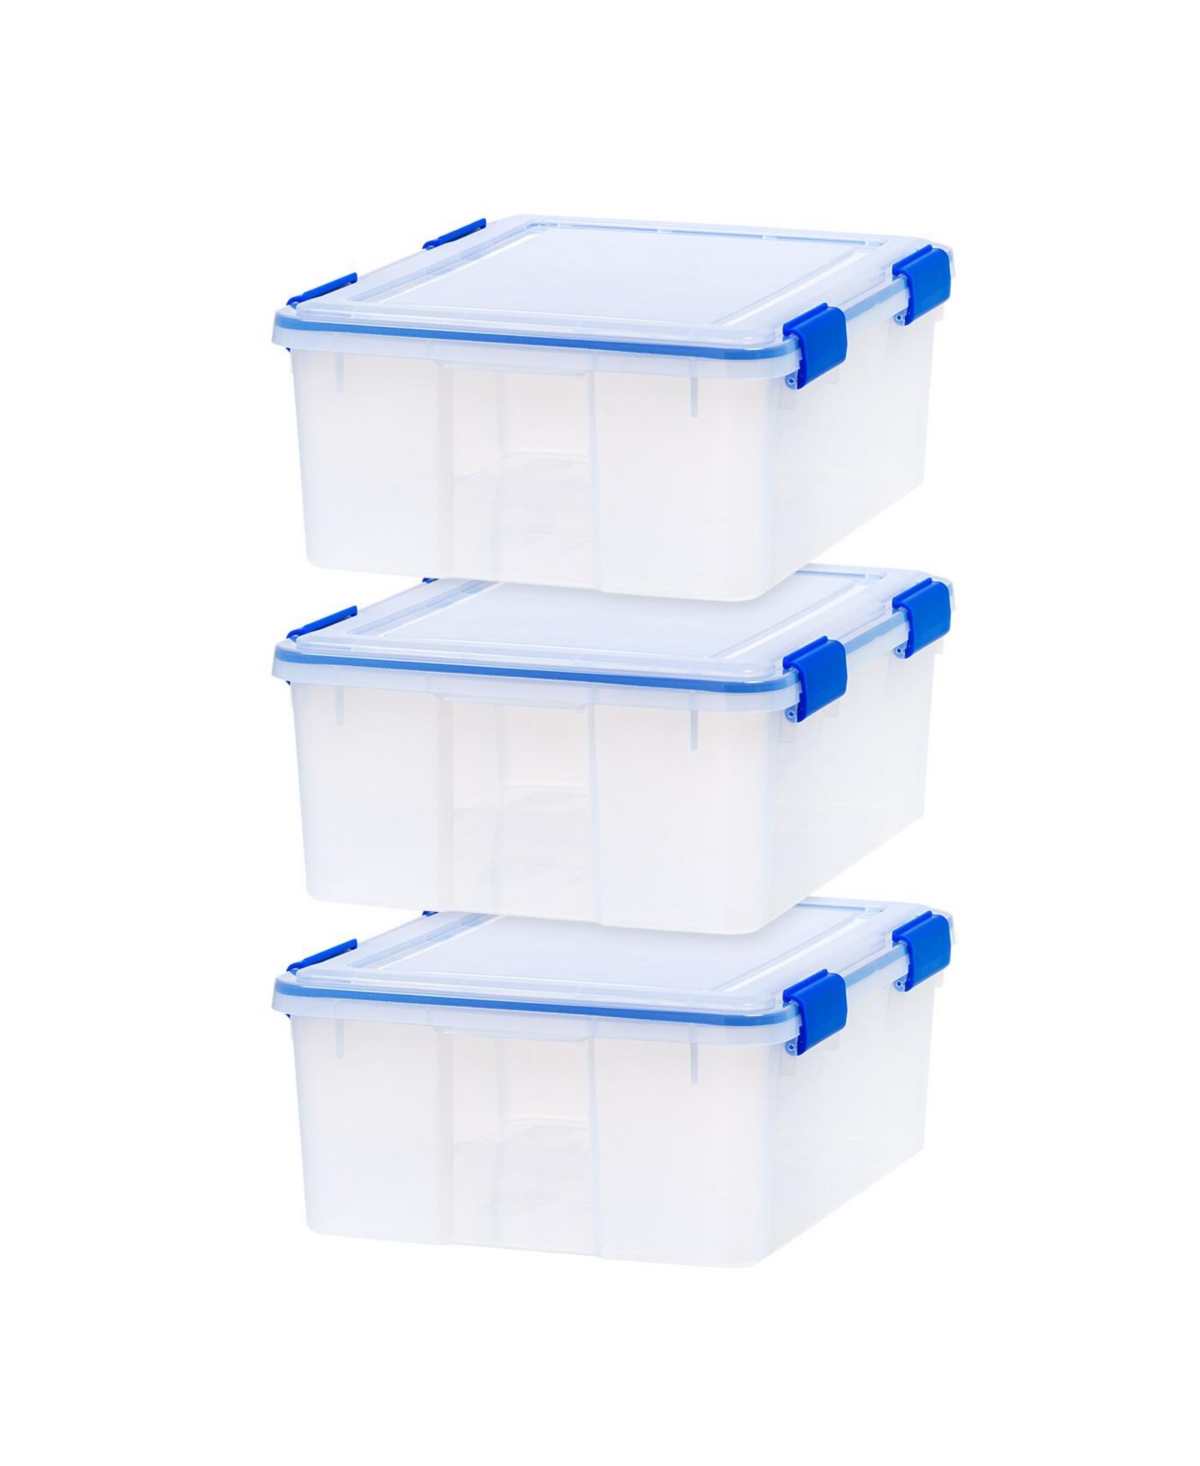 31 Qt Storage Box with Gasket Seal Lid, 3 Pack - Bpa-Free, Made in Usa - Heavy Duty Moving Containers with Tight Latch, Weather Proof Tote Bi